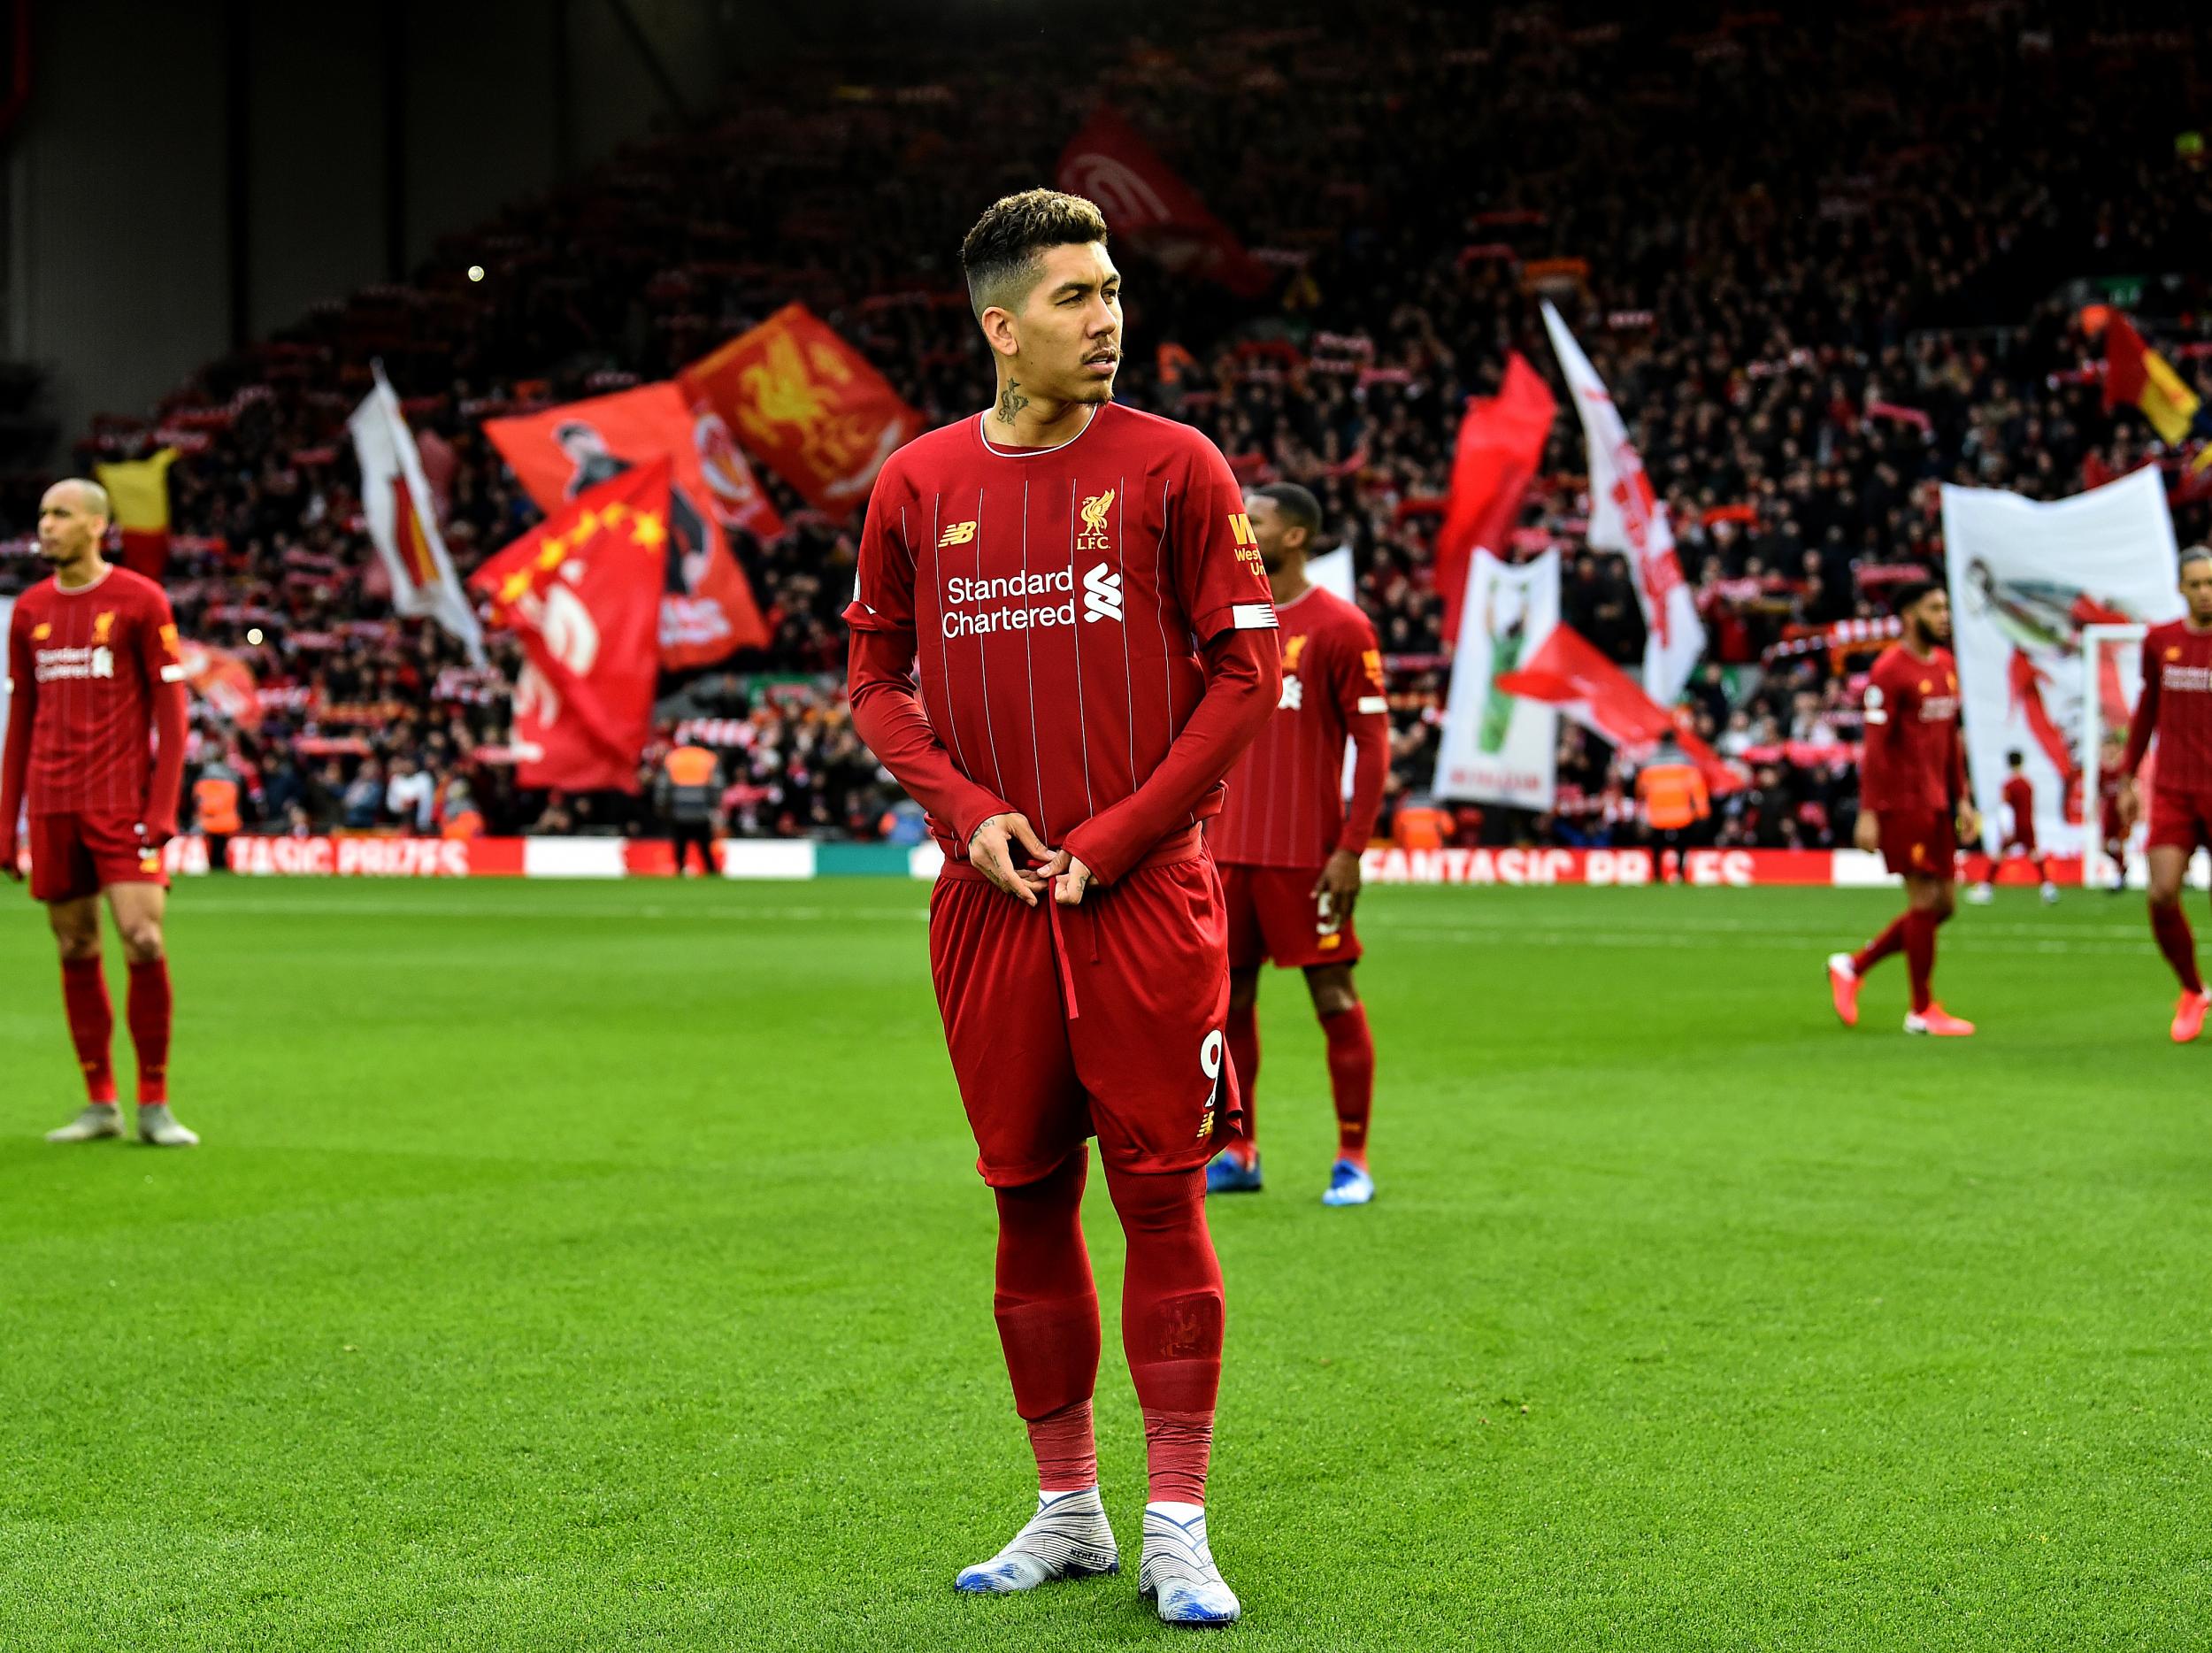 Liverpool: Roberto Firmino may be goal 